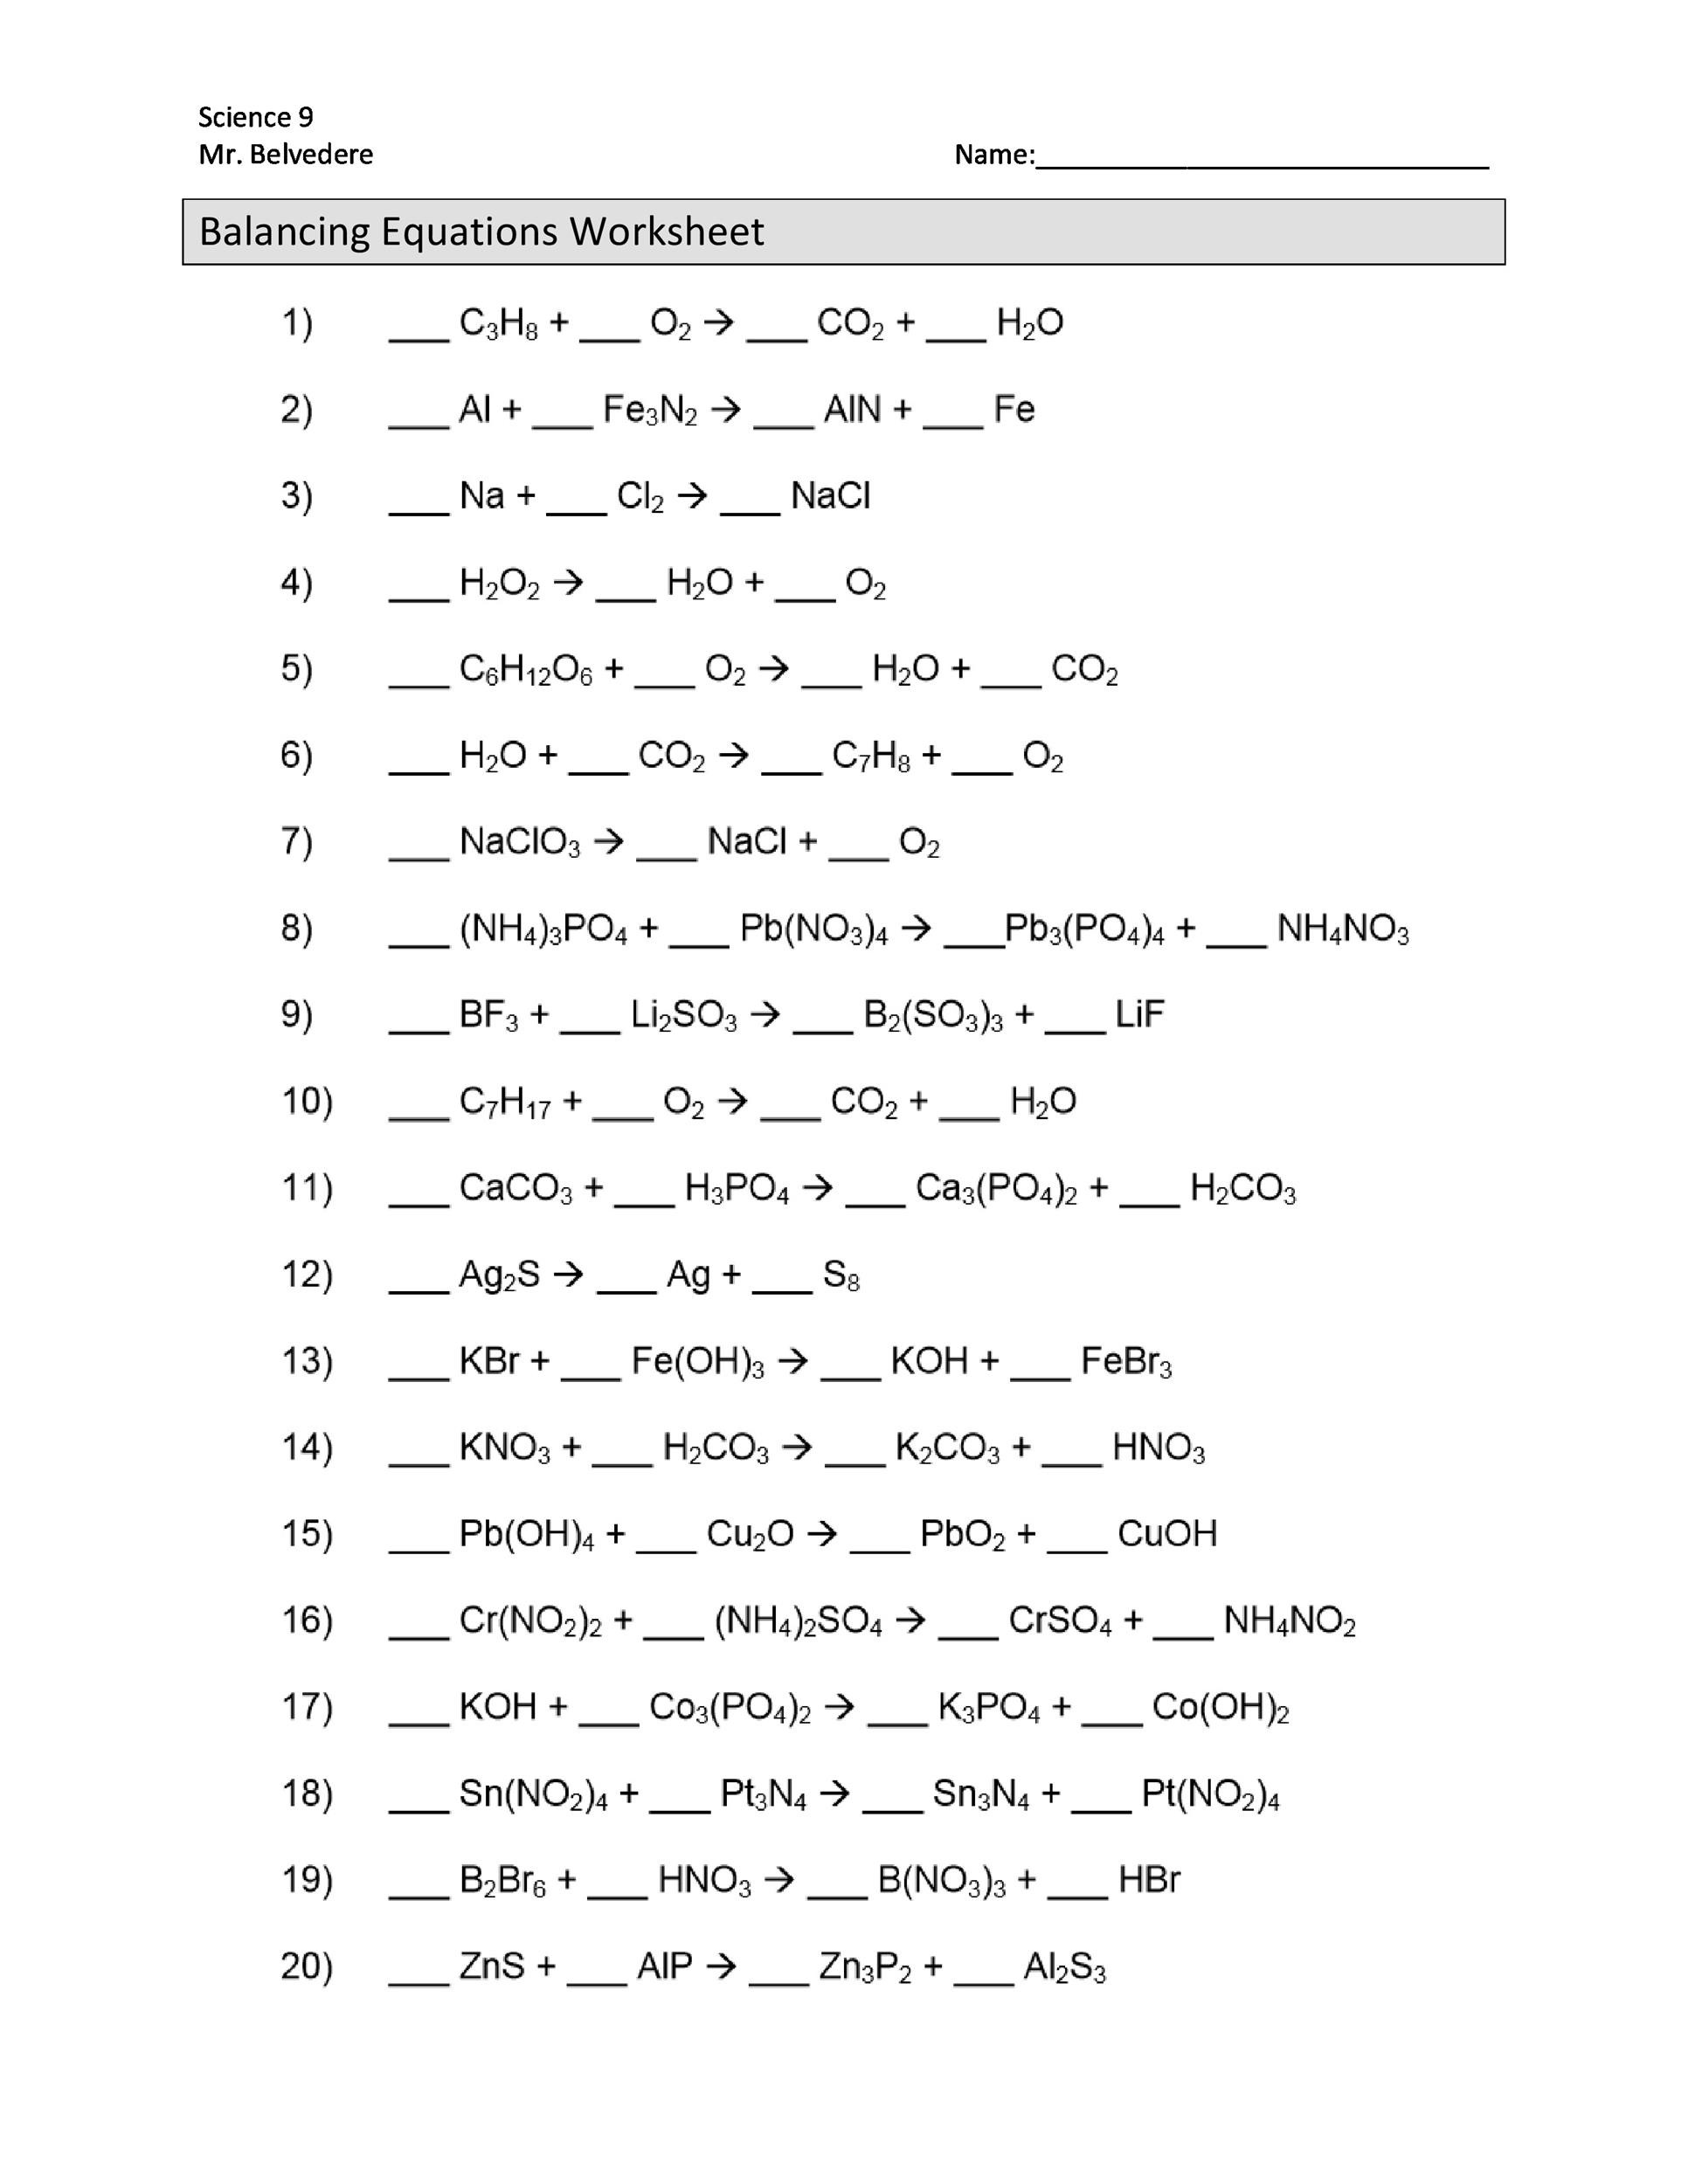 Nuclear Equations Worksheet Answers Nuclear Equation Problems ð·ï¸ Chemteam Writing Alpha and